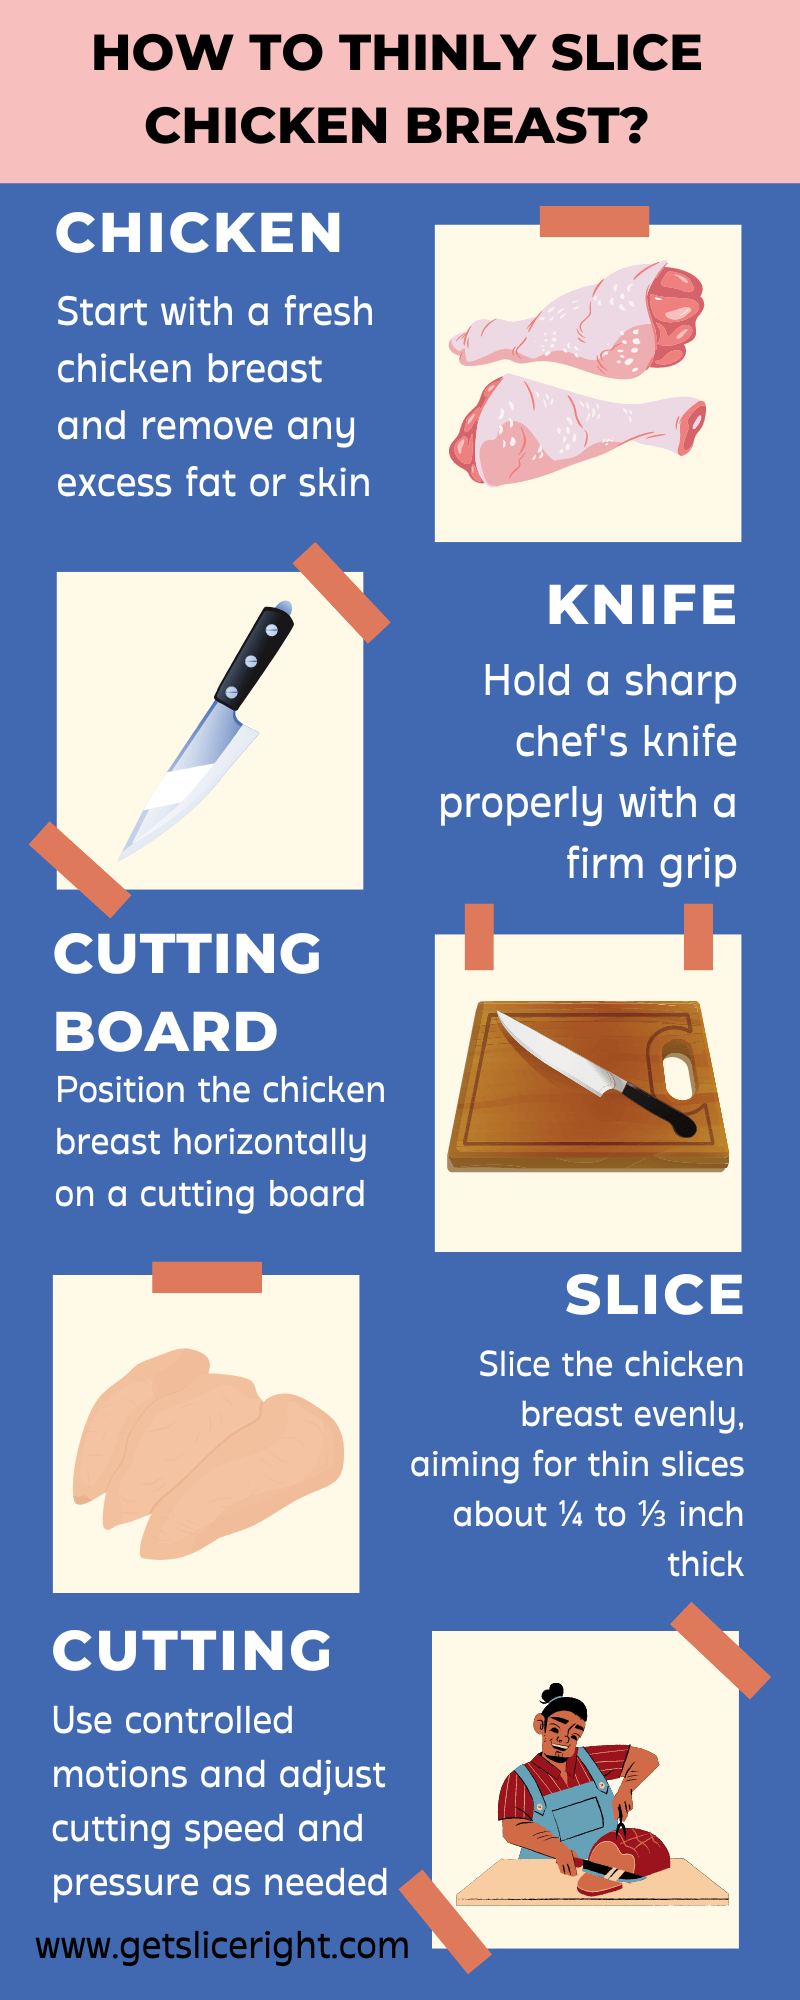 How To Thinly Slice Chicken Breast - Infographics